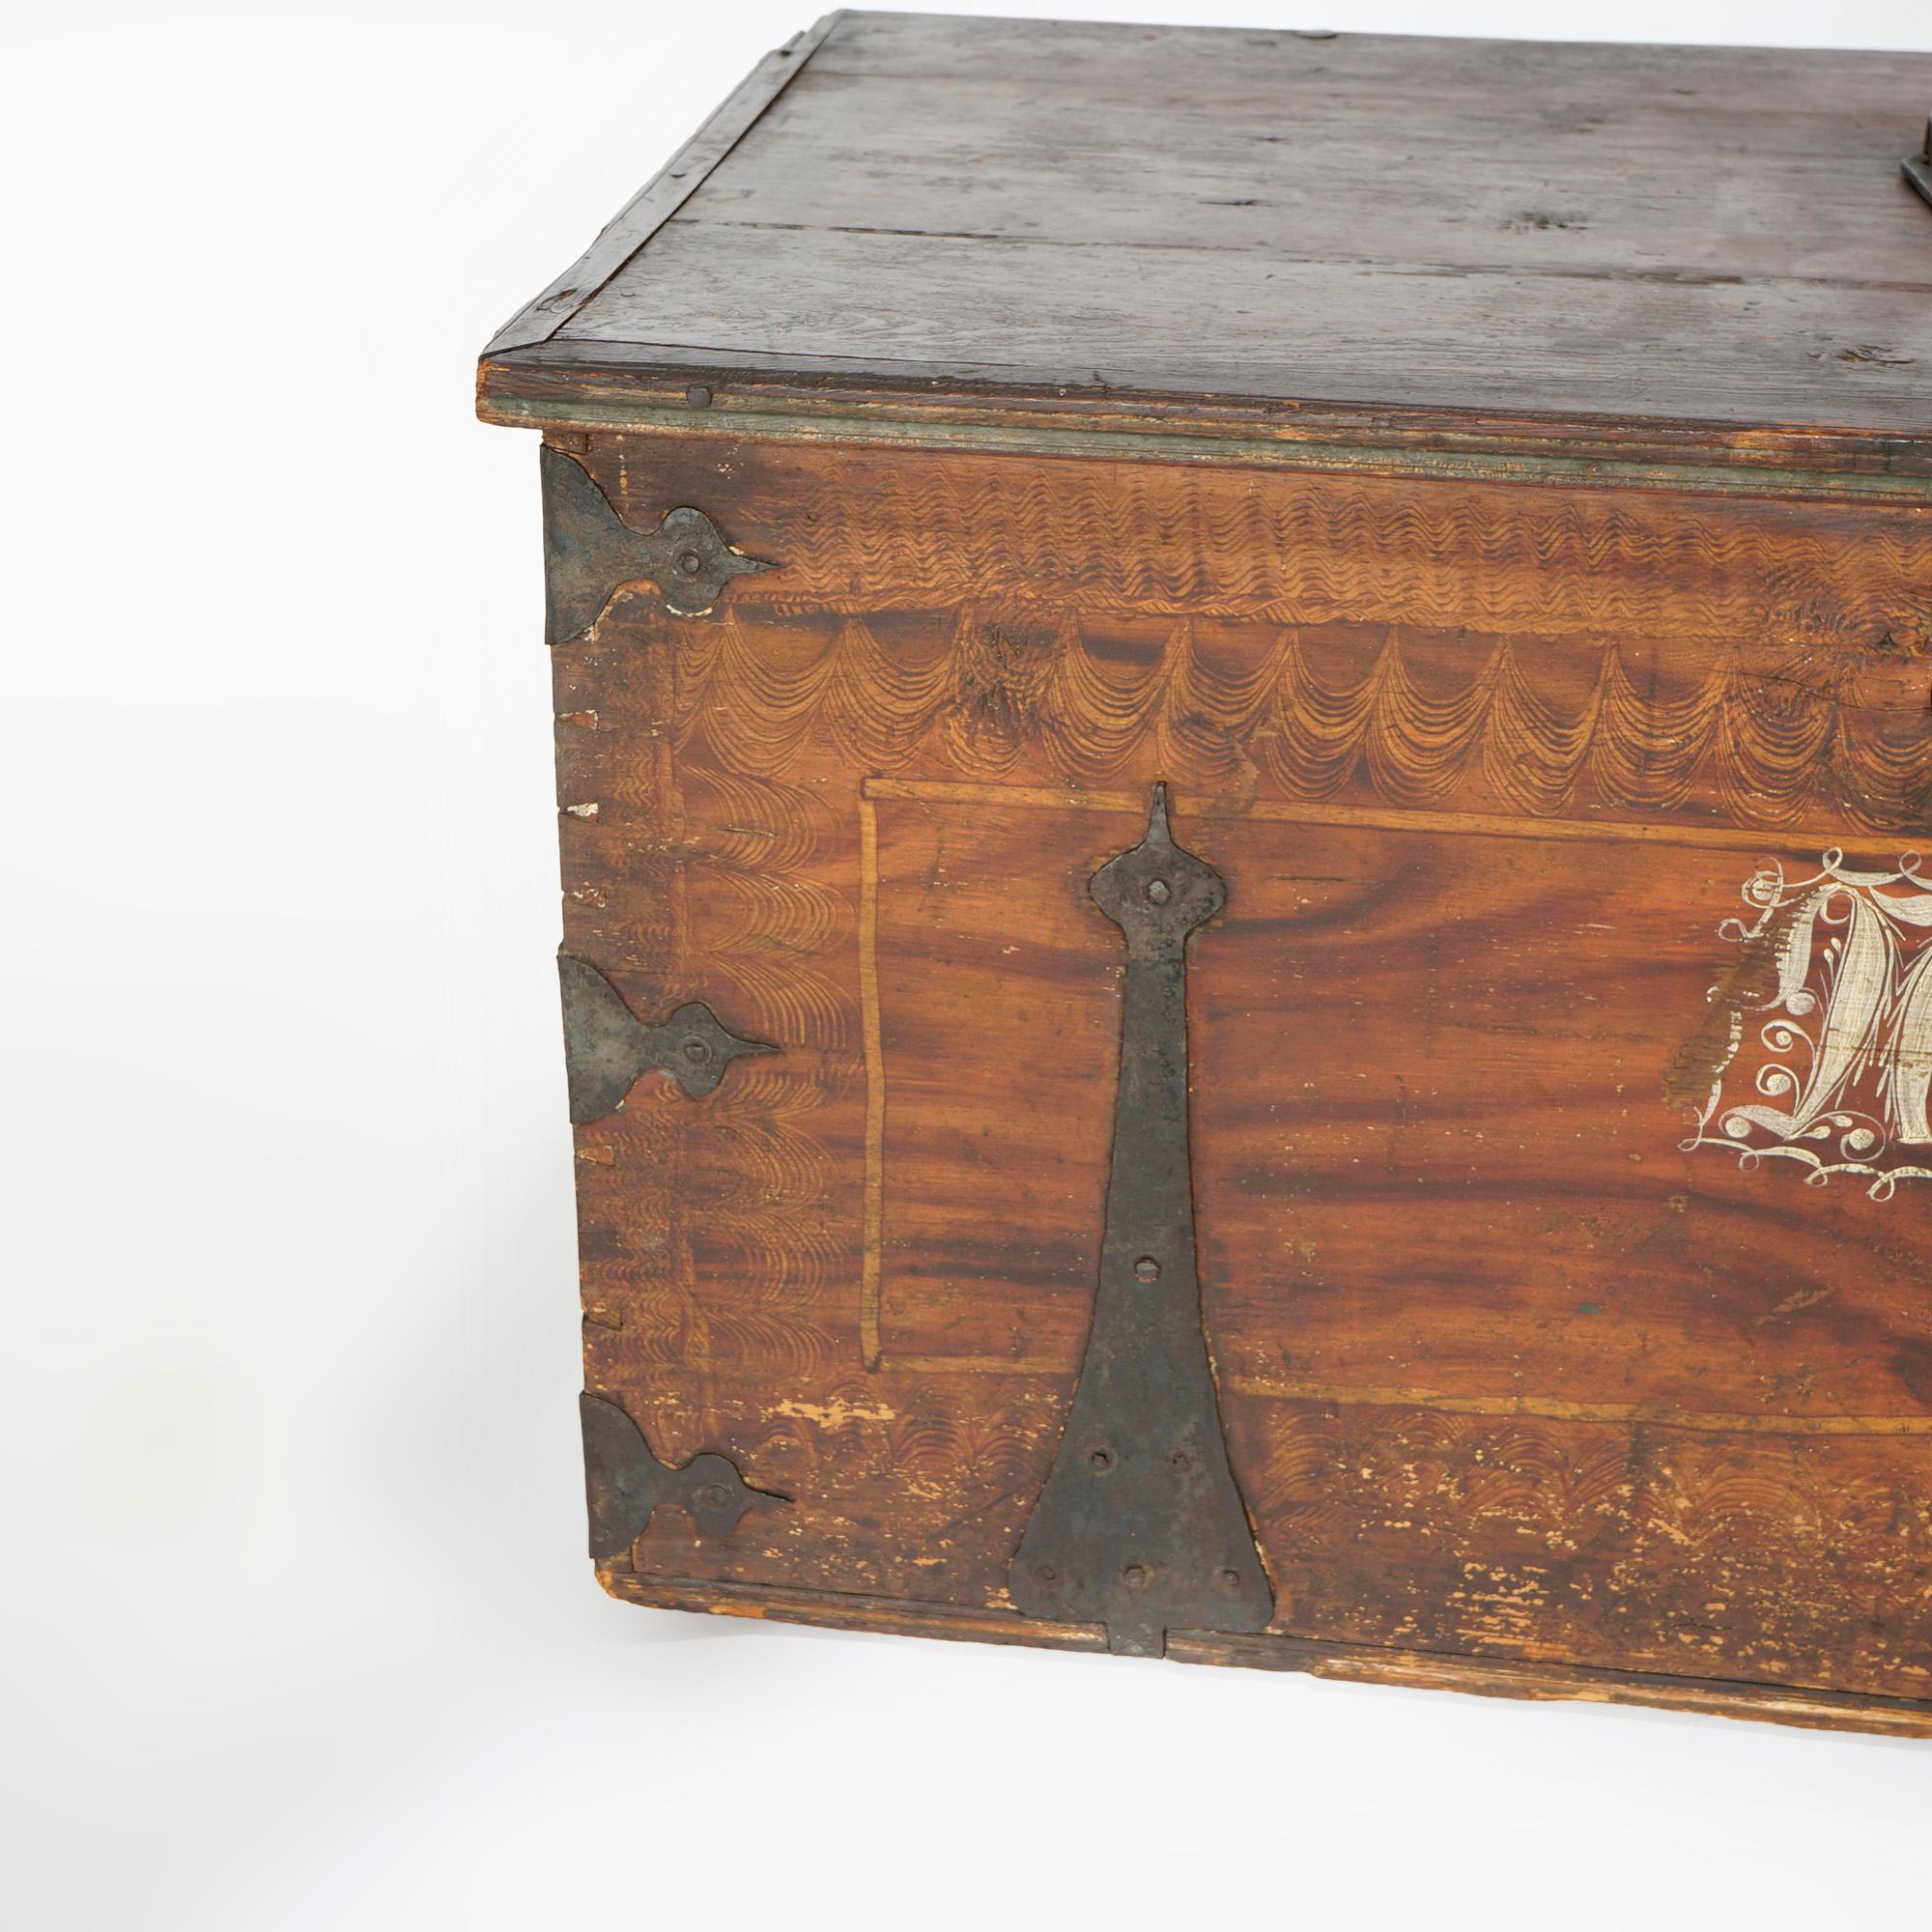 19th Century Antique Folk Art Grain Painted Blanket Chest with Strap Hinges, Dated 1846 For Sale